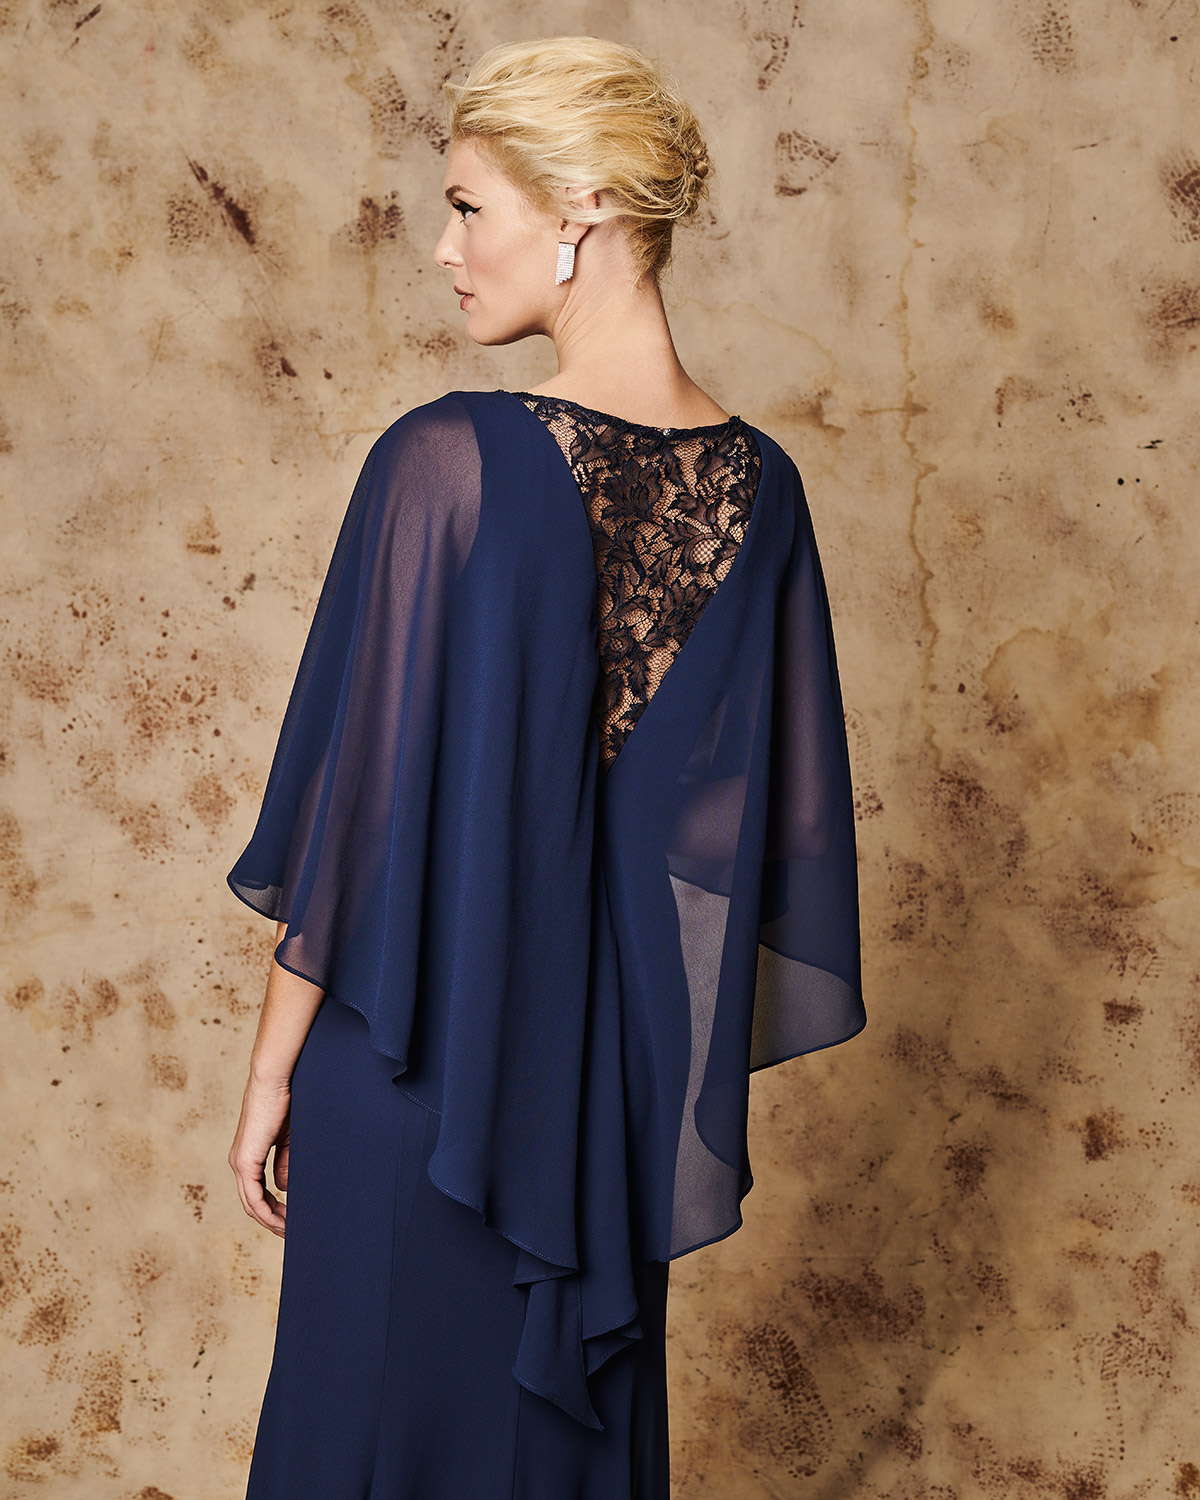 Classic Dresses / Long Evening Dress with wide sleeves and lace details